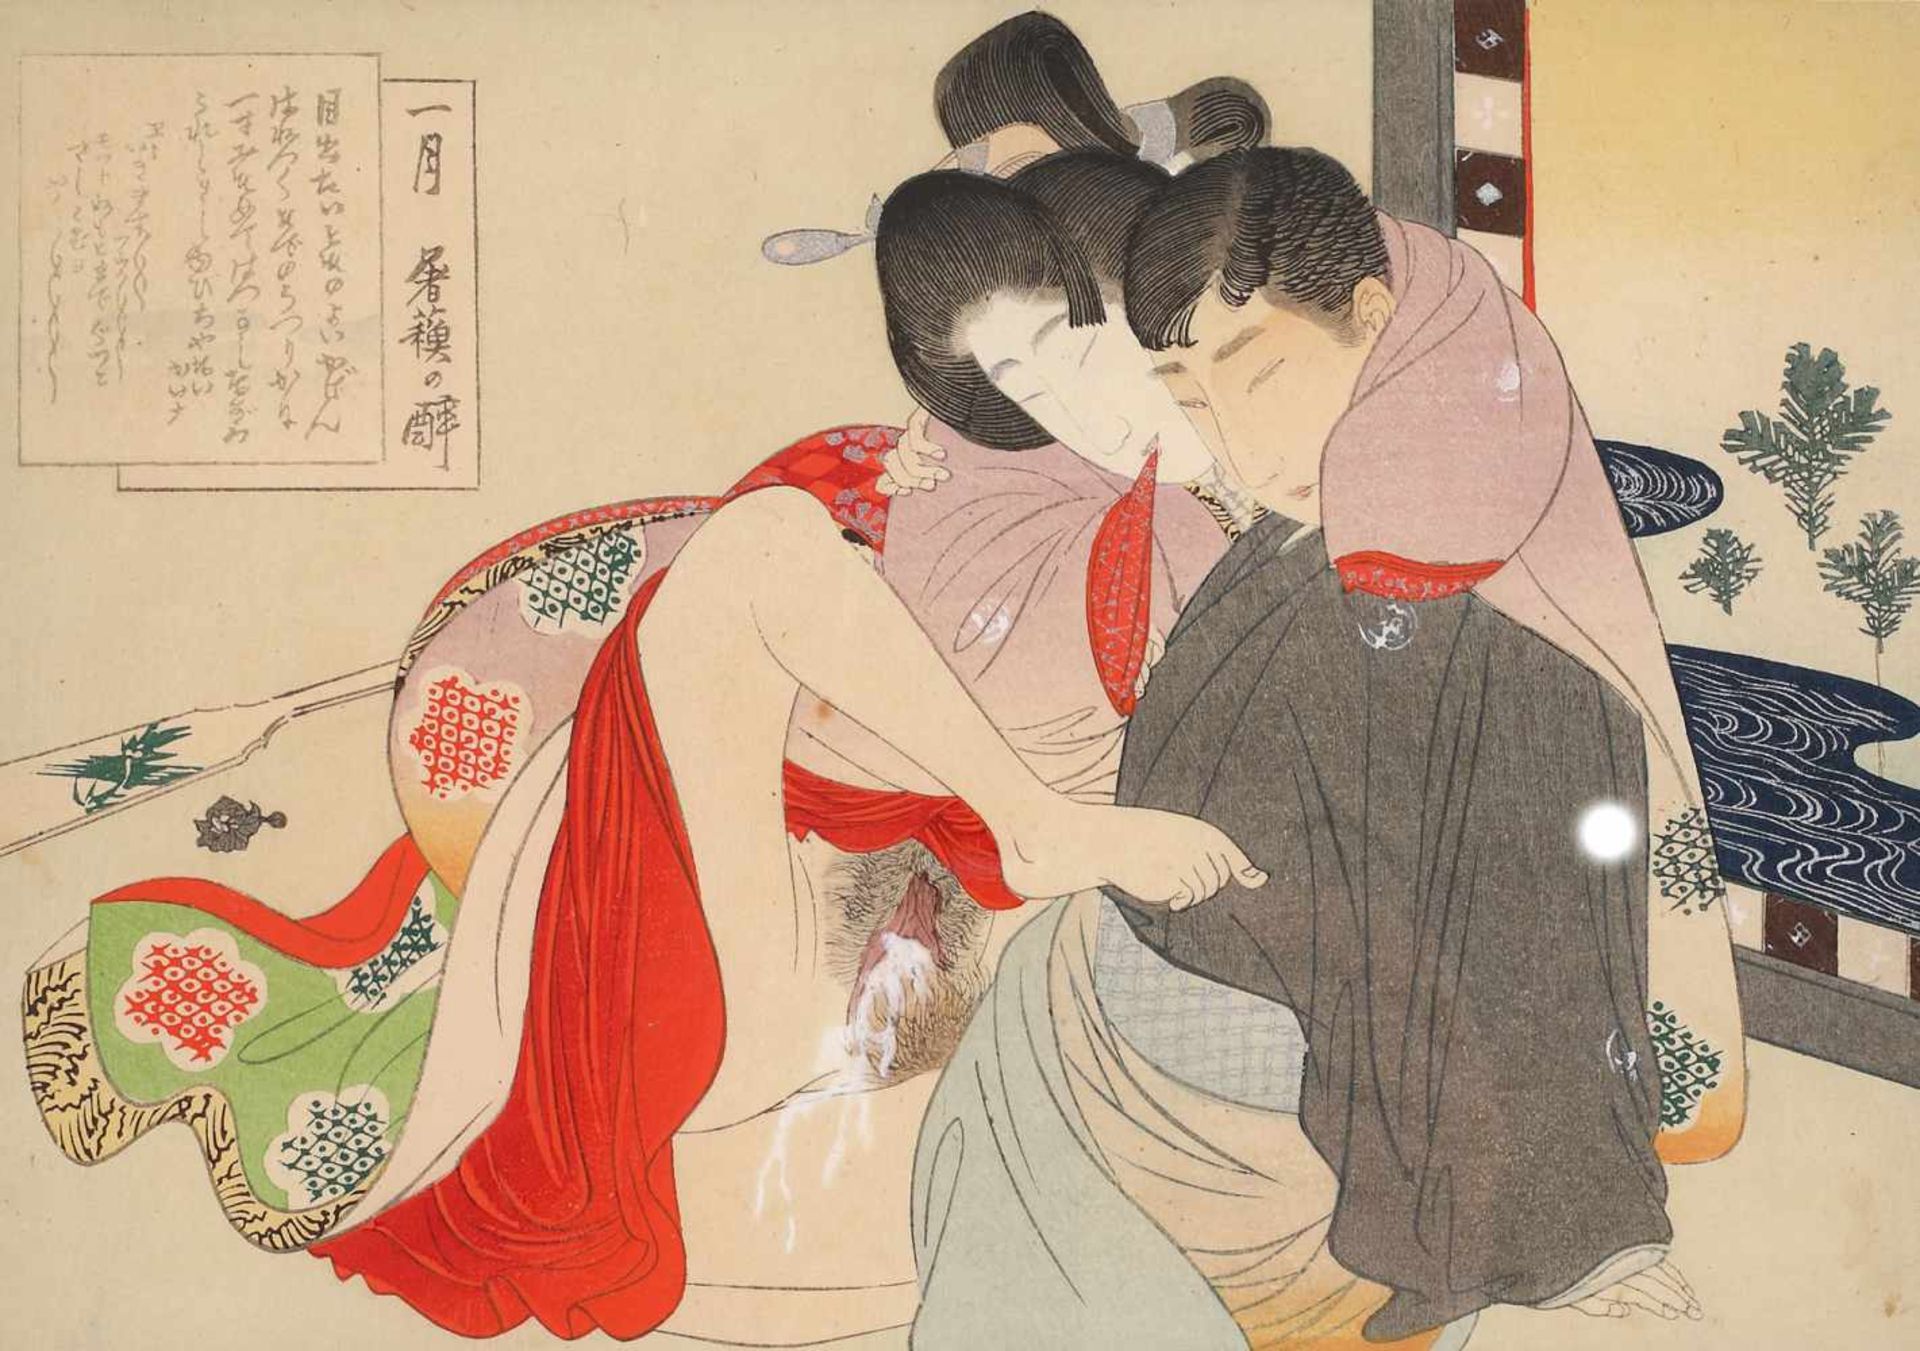 Shunga woodblock depicting a couple in an erotic embrace, ca 1900Shunga woodblock depicting a couple